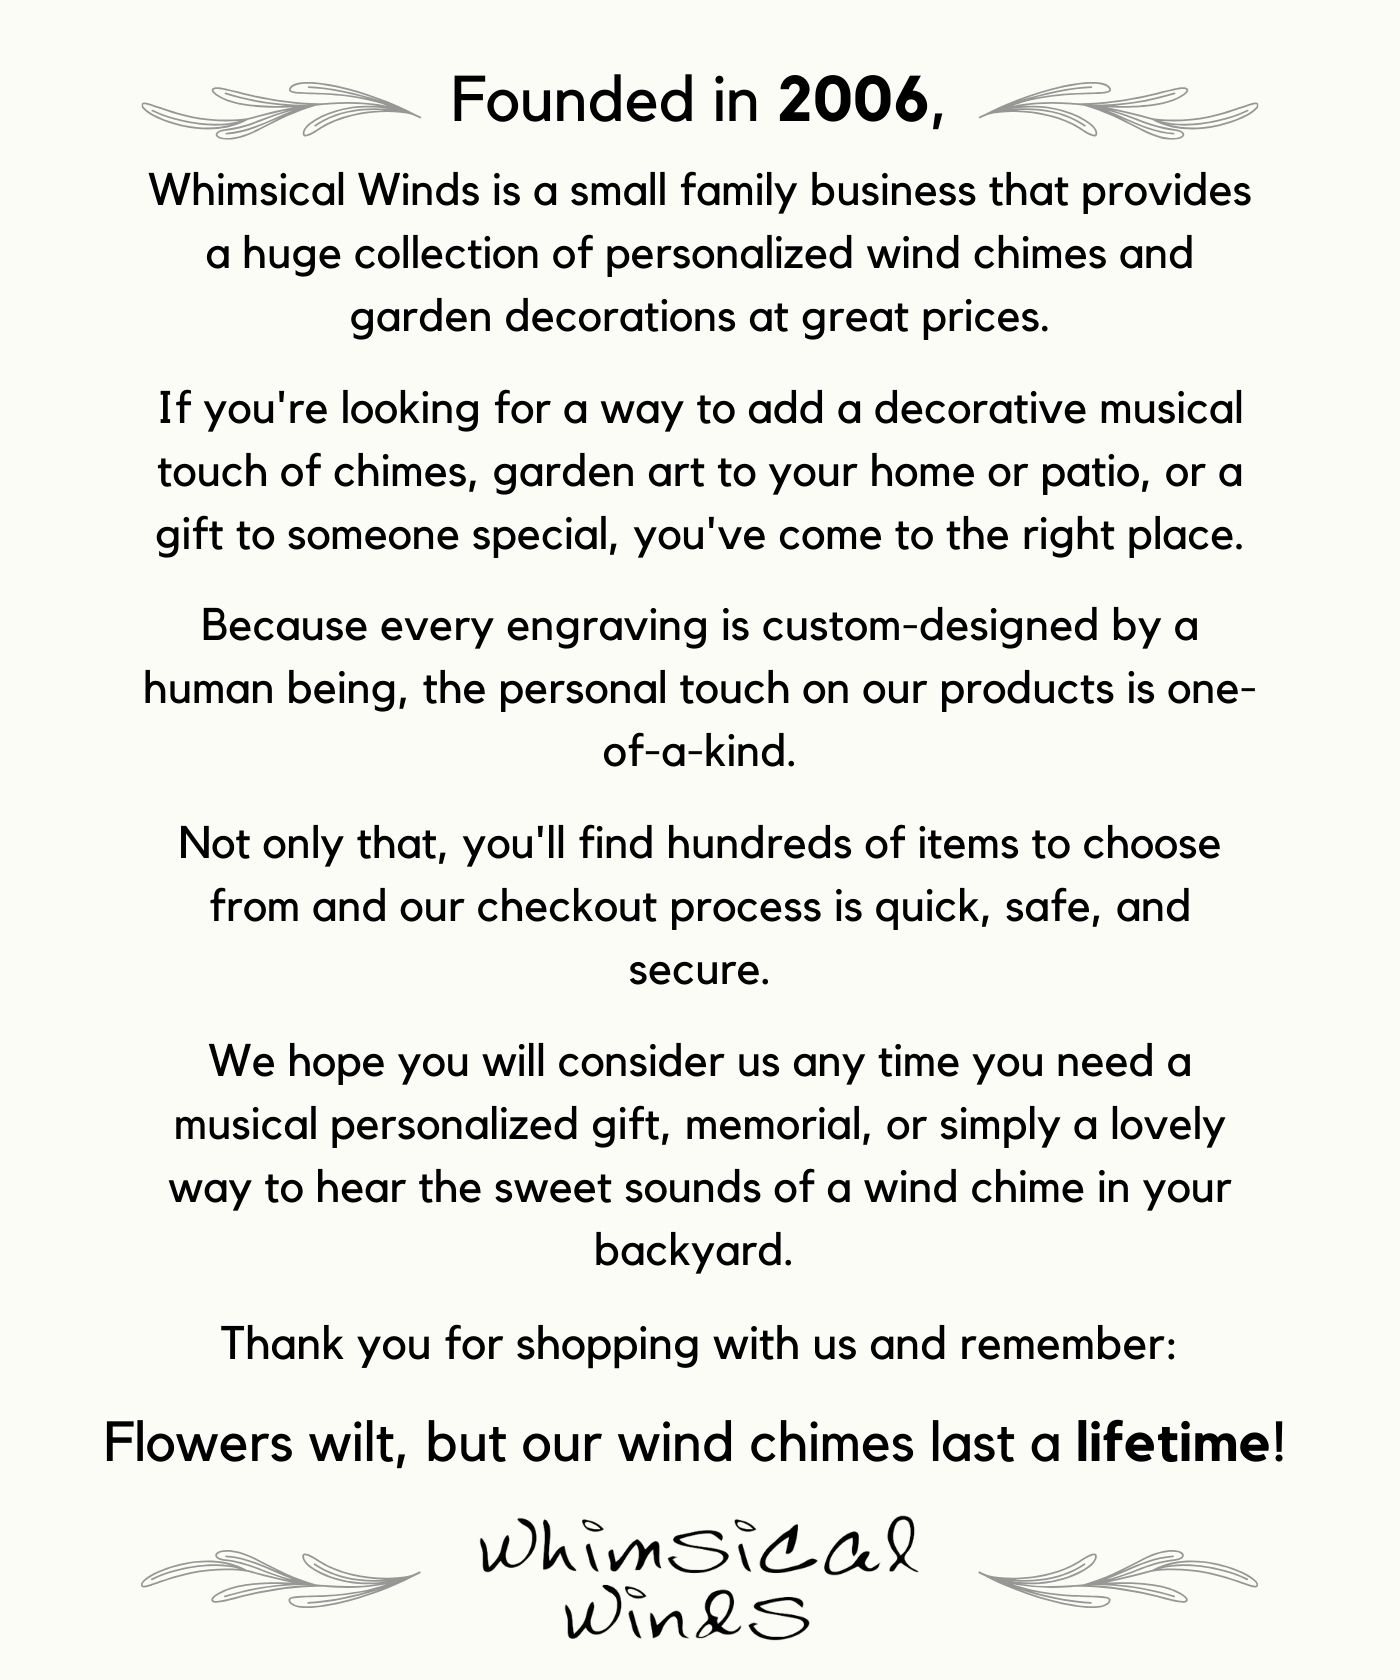 About Us Whimsical Winds is a small family business that provides a huge collection of personalized wind chimes and garden decorations at great prices. If you're looking for a way to add a decorative musical touch of chimes, garden art to your home or patio, or a gift to someone special, you've come to the right place. Because every engraving is custom-designed by a human being, the personal touch on our products is one-of-a-kind. Not only that, you'll find hundreds of items to choose from and our checkout process is quick, safe, and secure. We hope you will consider us any time you need a musical personalized gift, memorial, or simply a lovely way to hear the sweet sounds of a wind chime in your backyard. Thank you for shopping with us and remember: Flowers wilt, but our wind chimes last a lifetime! Whimsical Winds